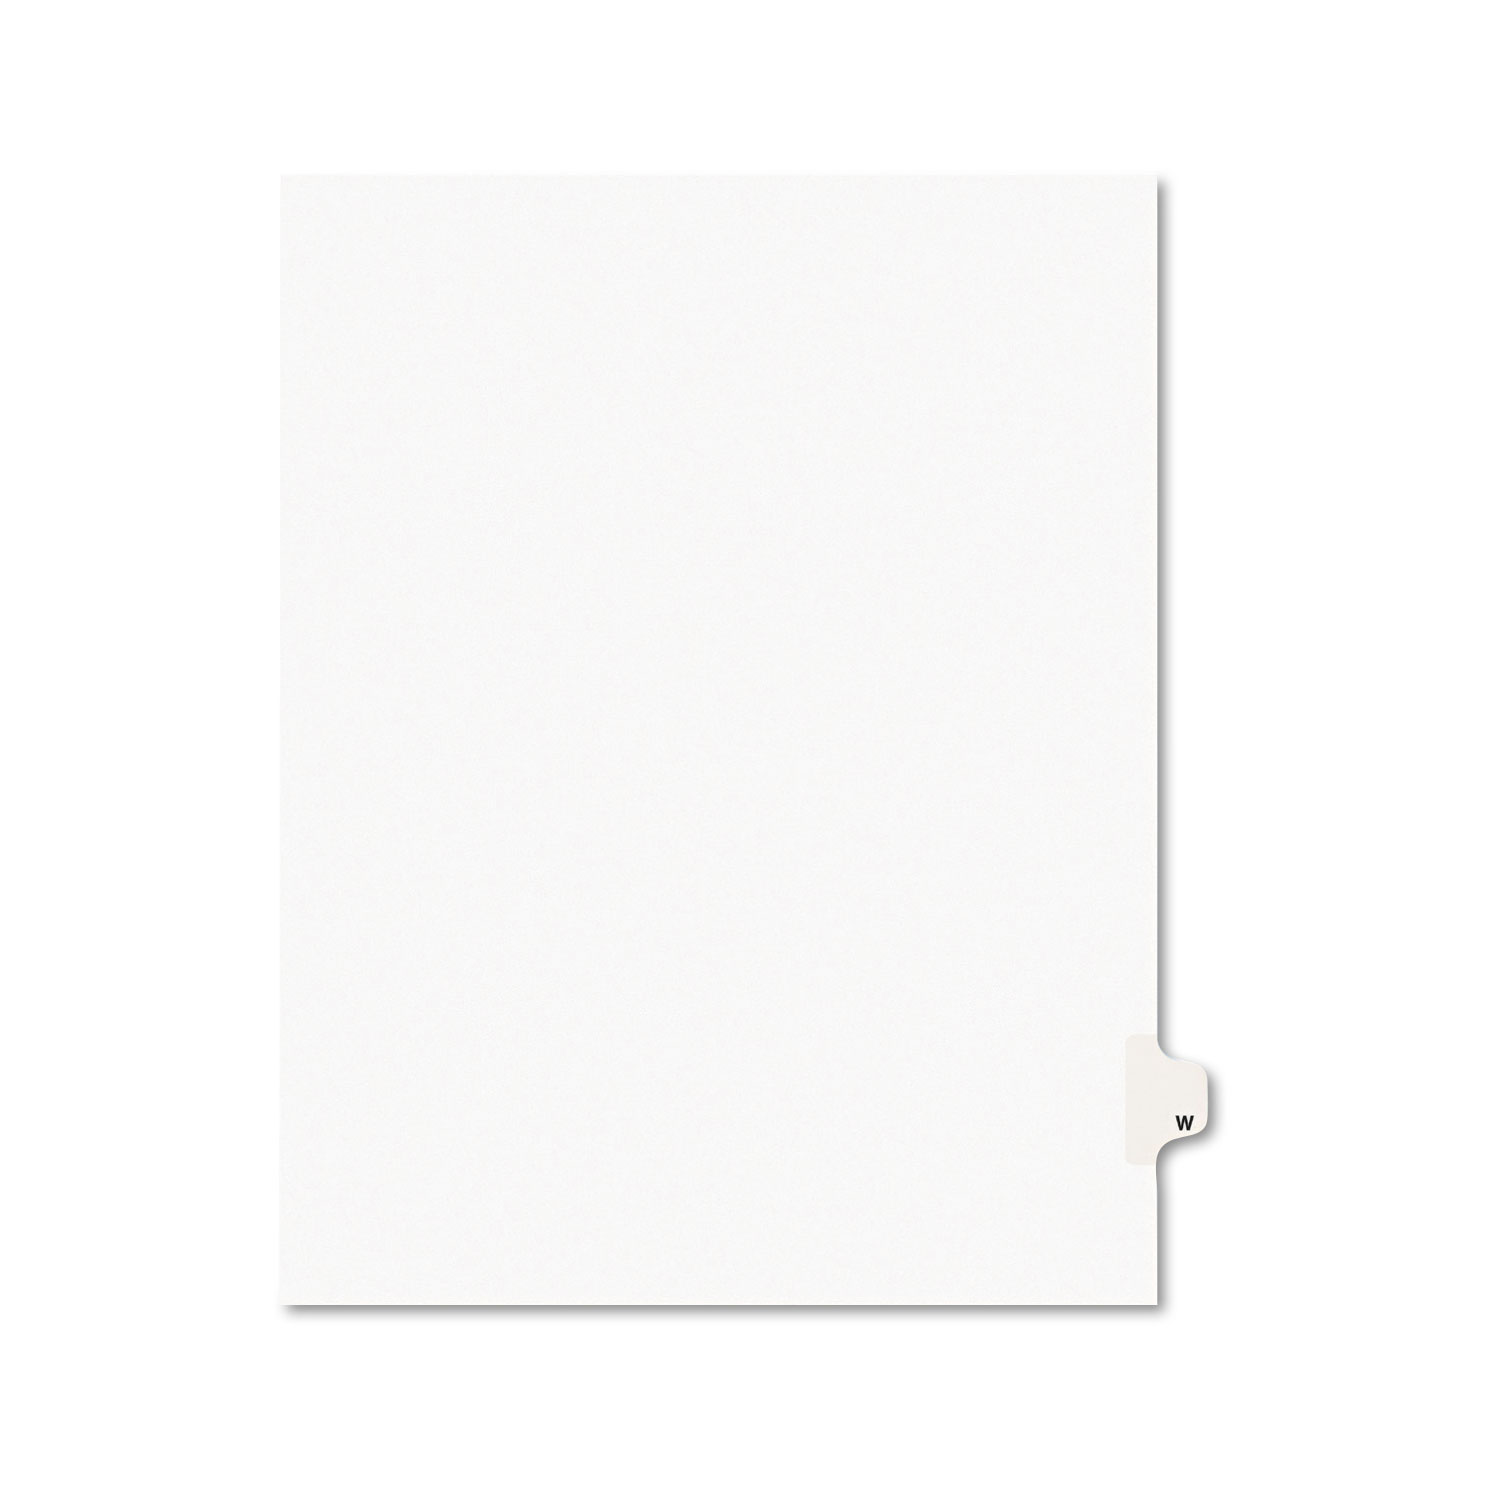  Avery 01423 Preprinted Legal Exhibit Side Tab Index Dividers, Avery Style, 26-Tab, W, 11 x 8.5, White, 25/Pack (AVE01423) 